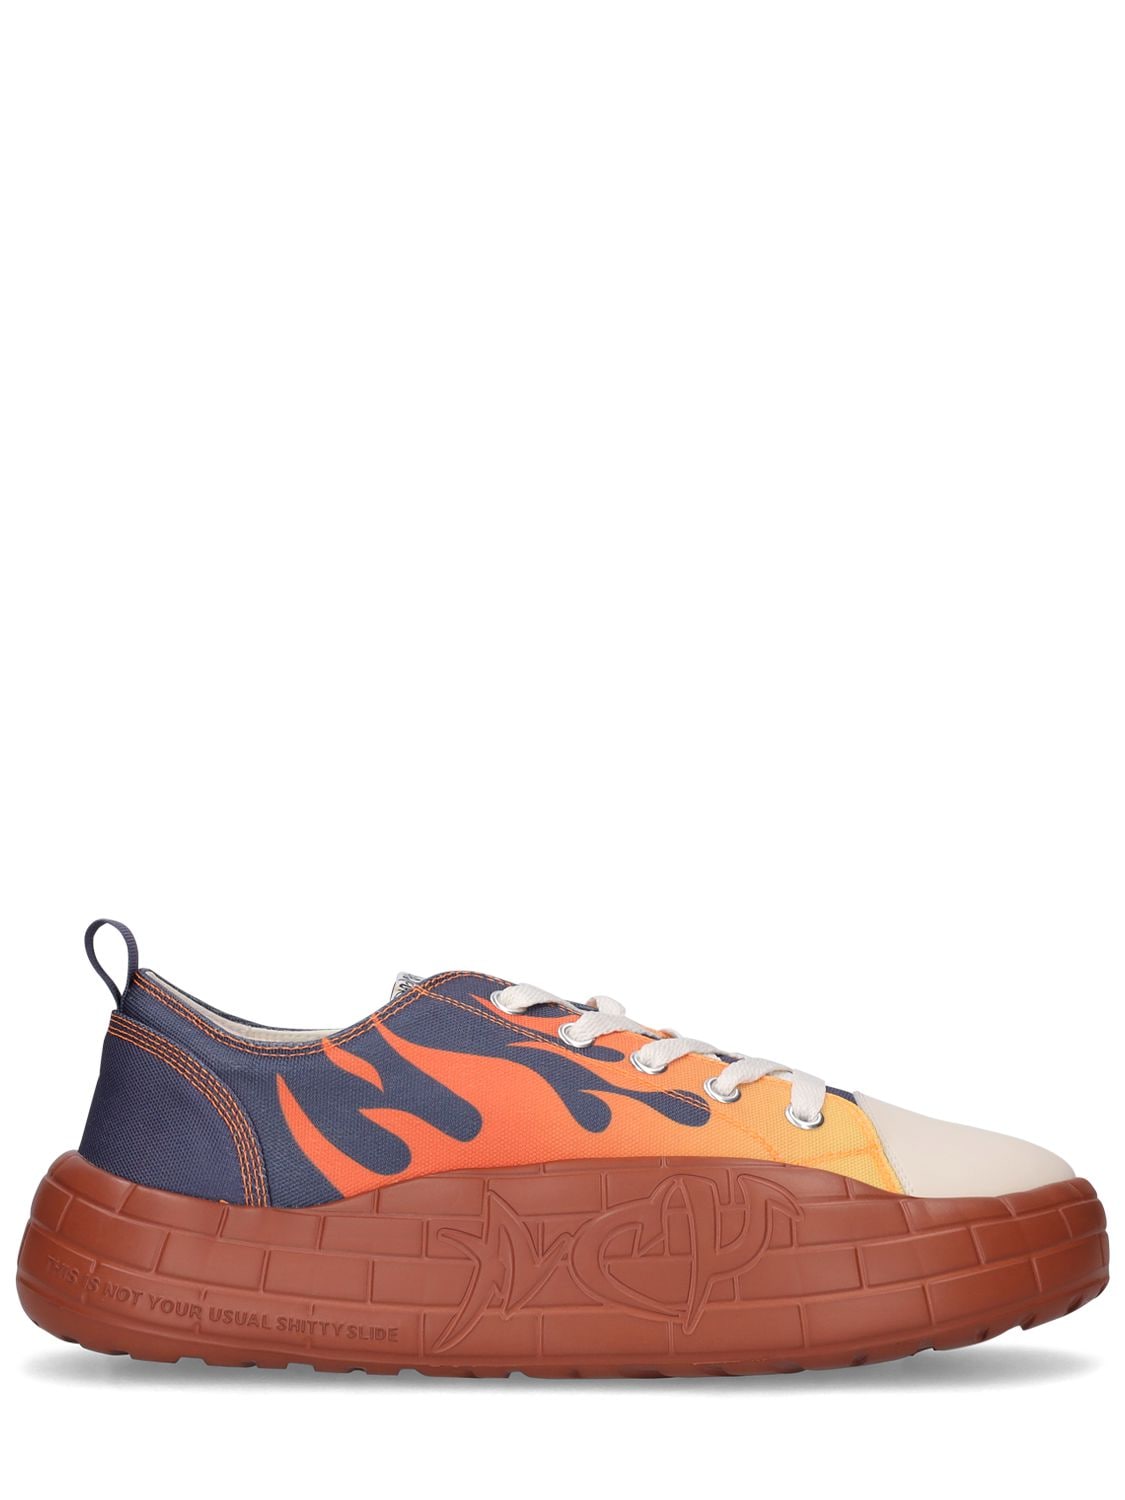 Acupuncture Nyu Vulc Flame Canvas Sneakers In Orange